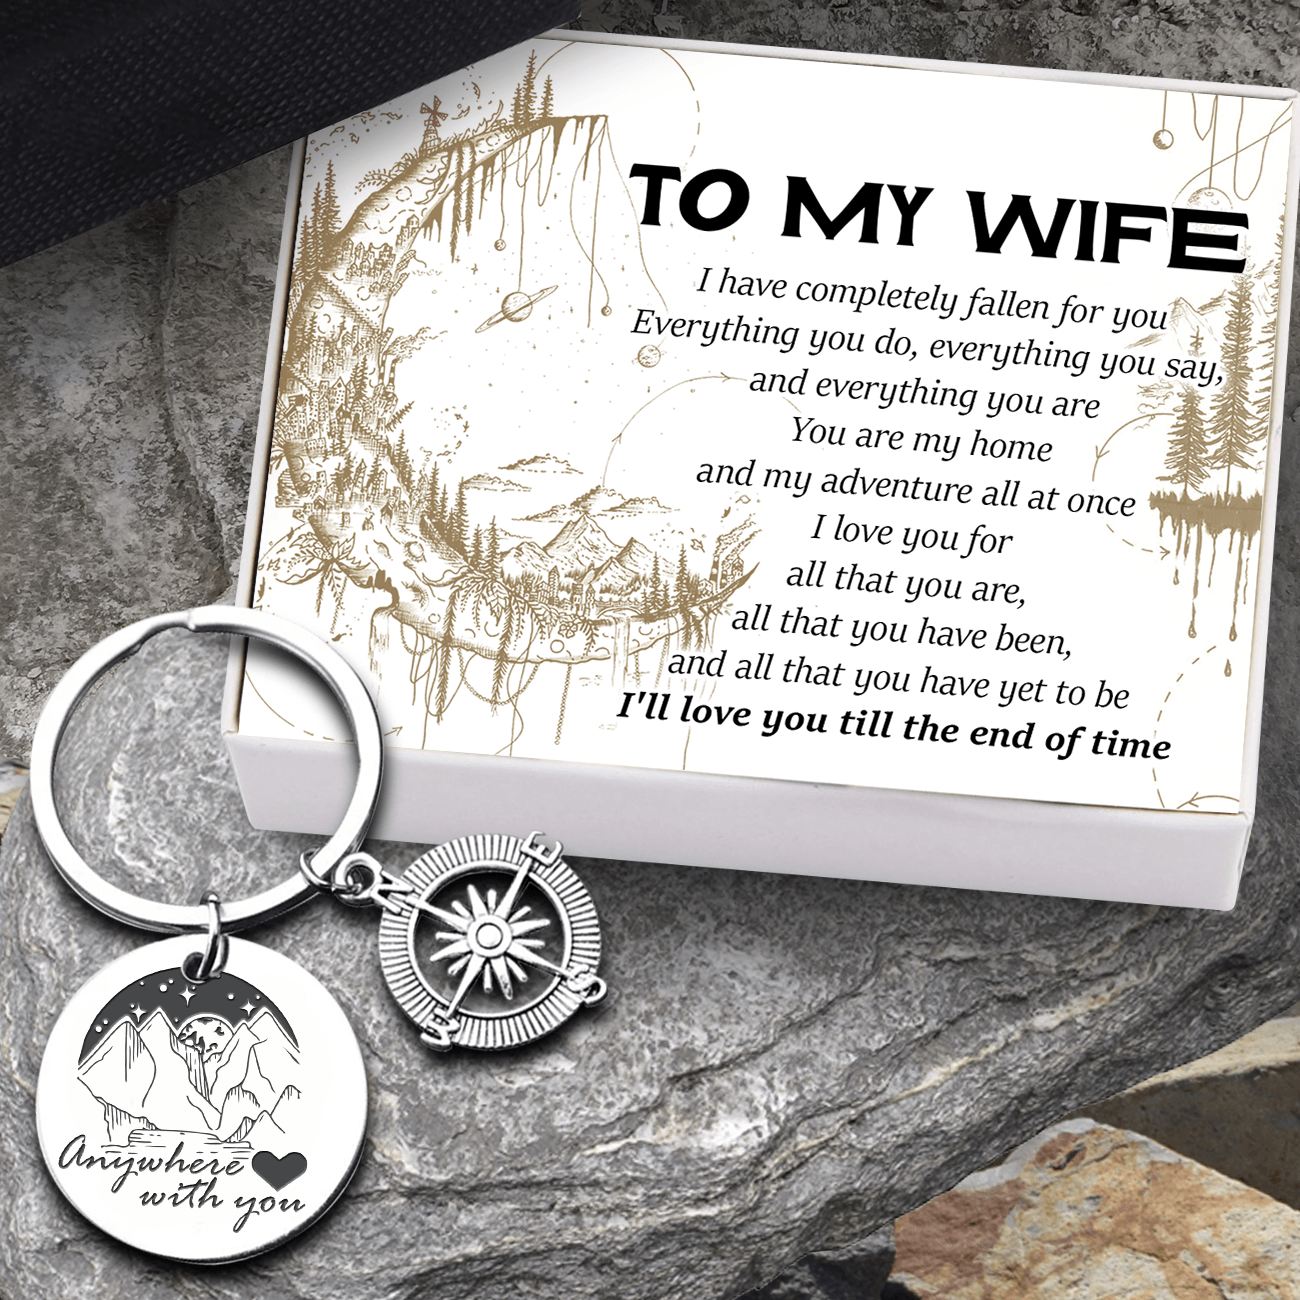 Compass Keychain - Hiking - To My Wife - You Are My Home And My Adventure All At Once - Augkw15004 - Gifts Holder